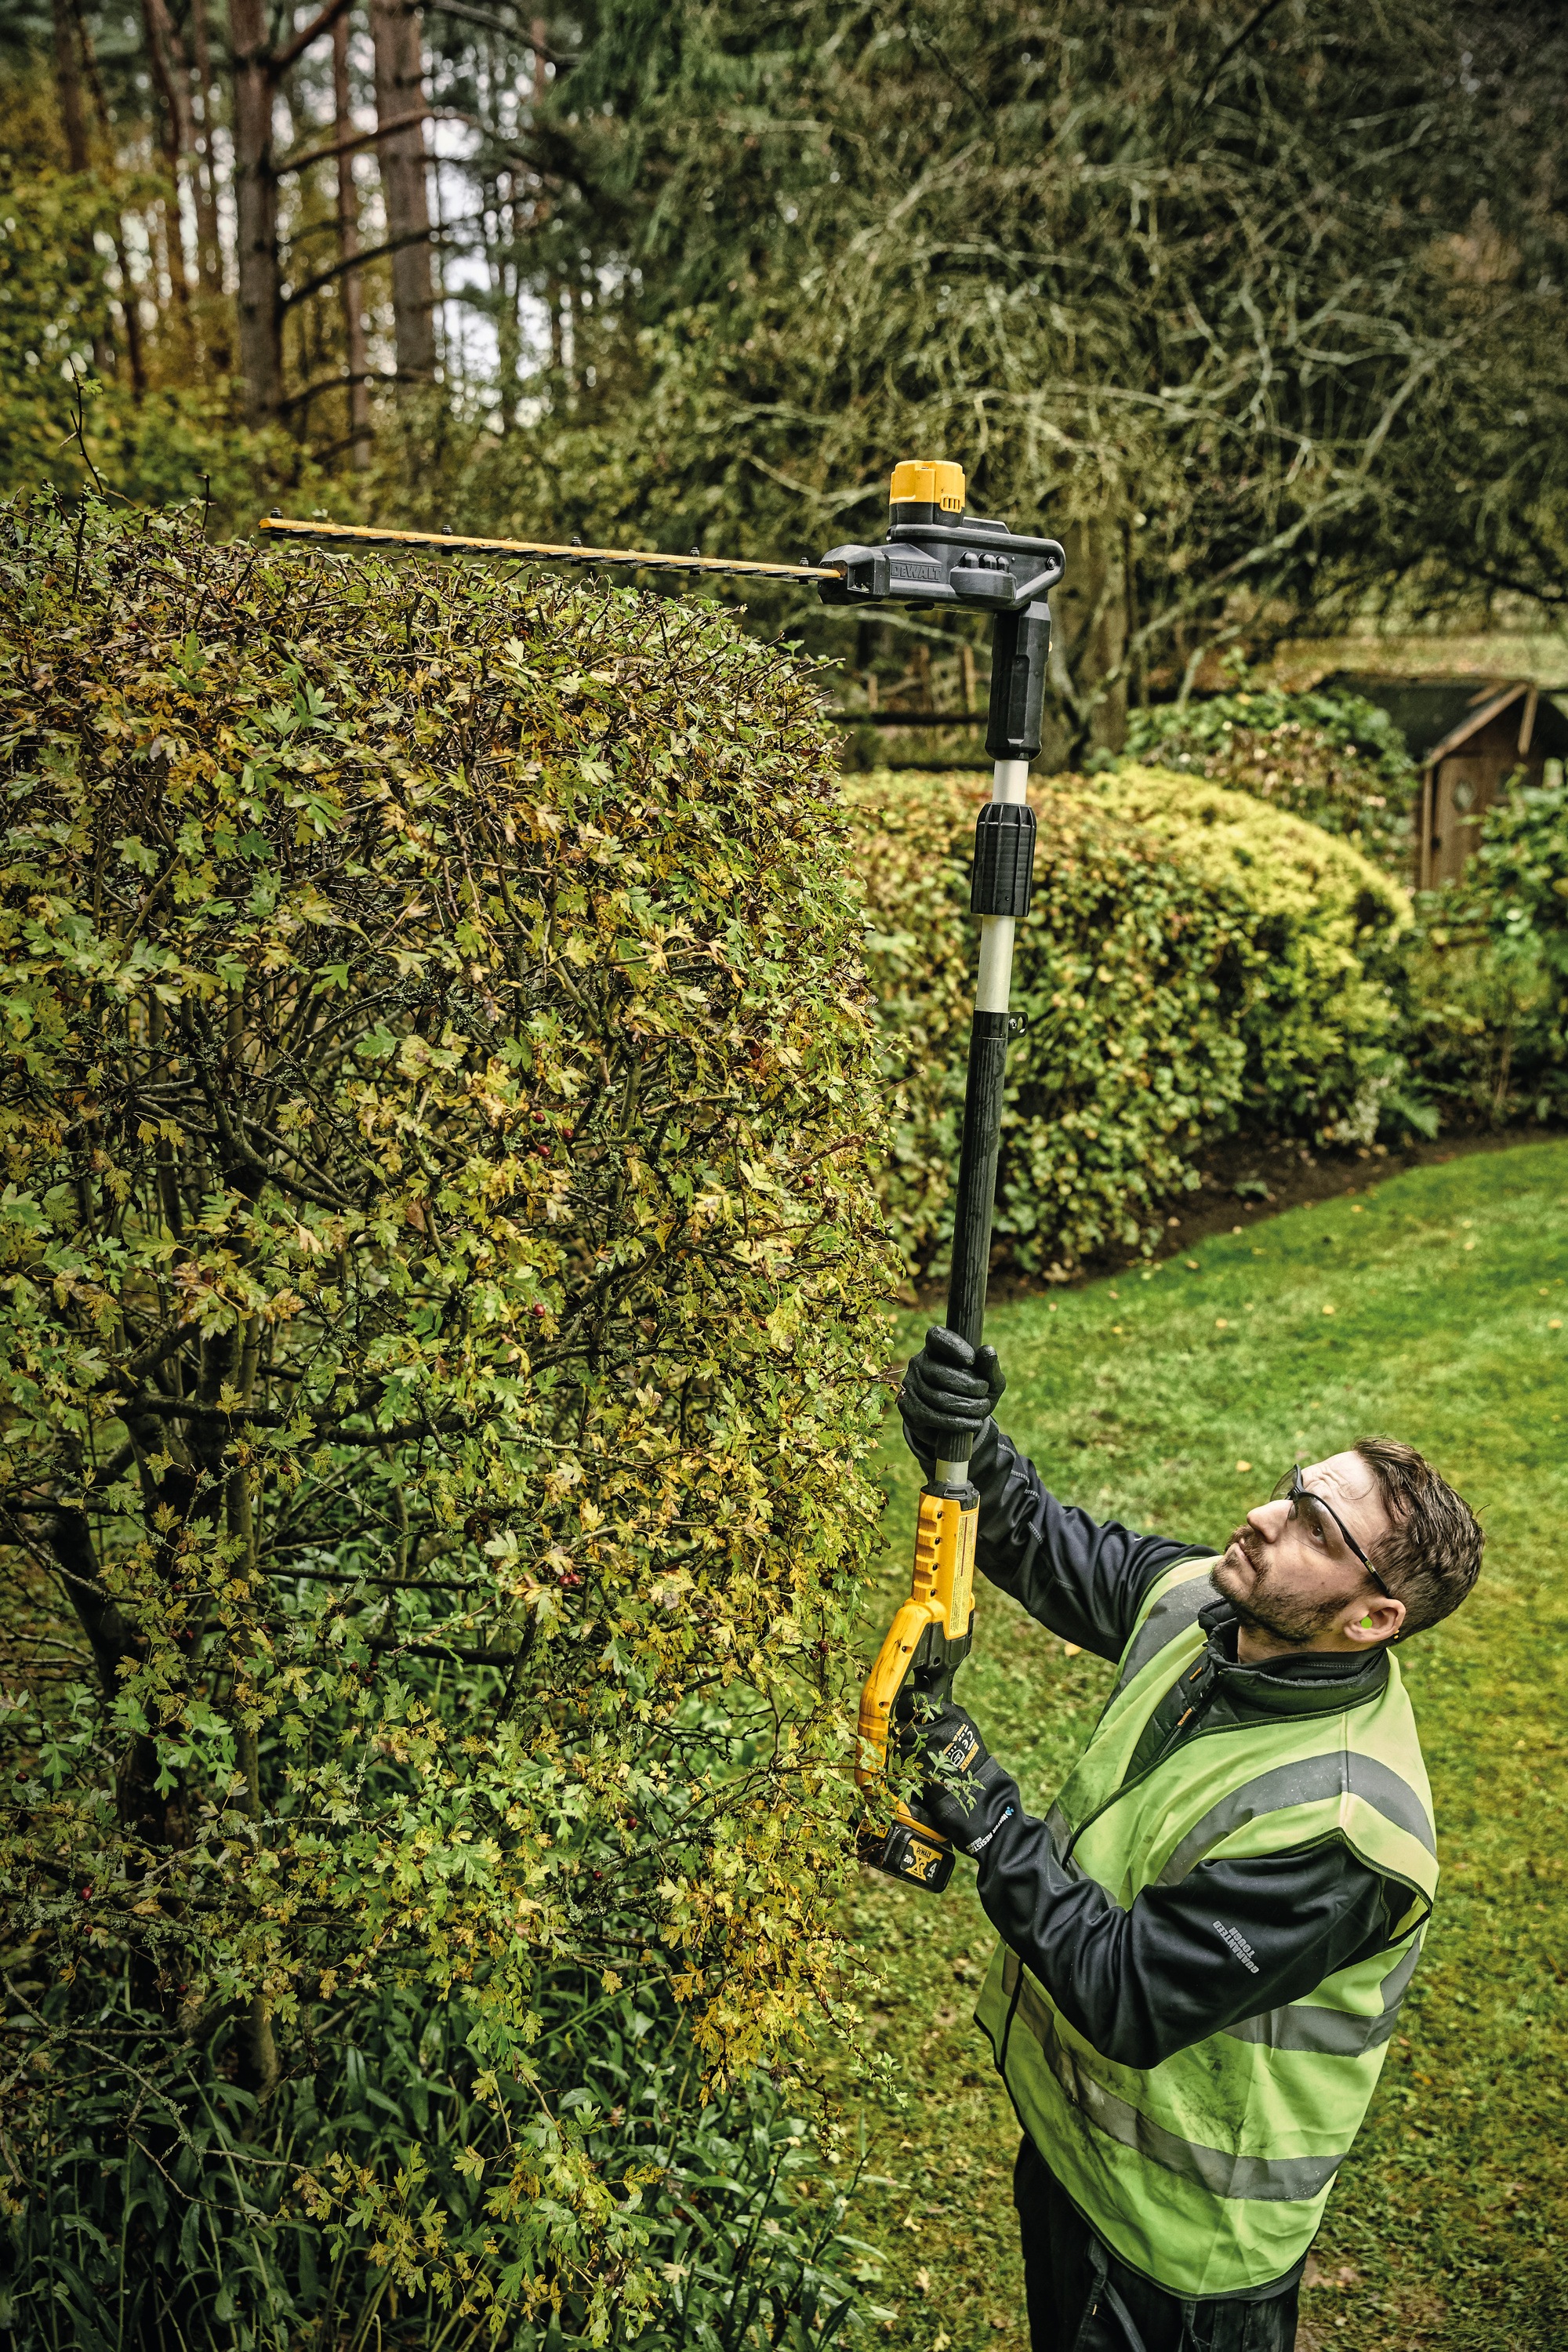 Overhead view of Pole Hedge Trimmer being used by a person to cut through landscape outgrowth.